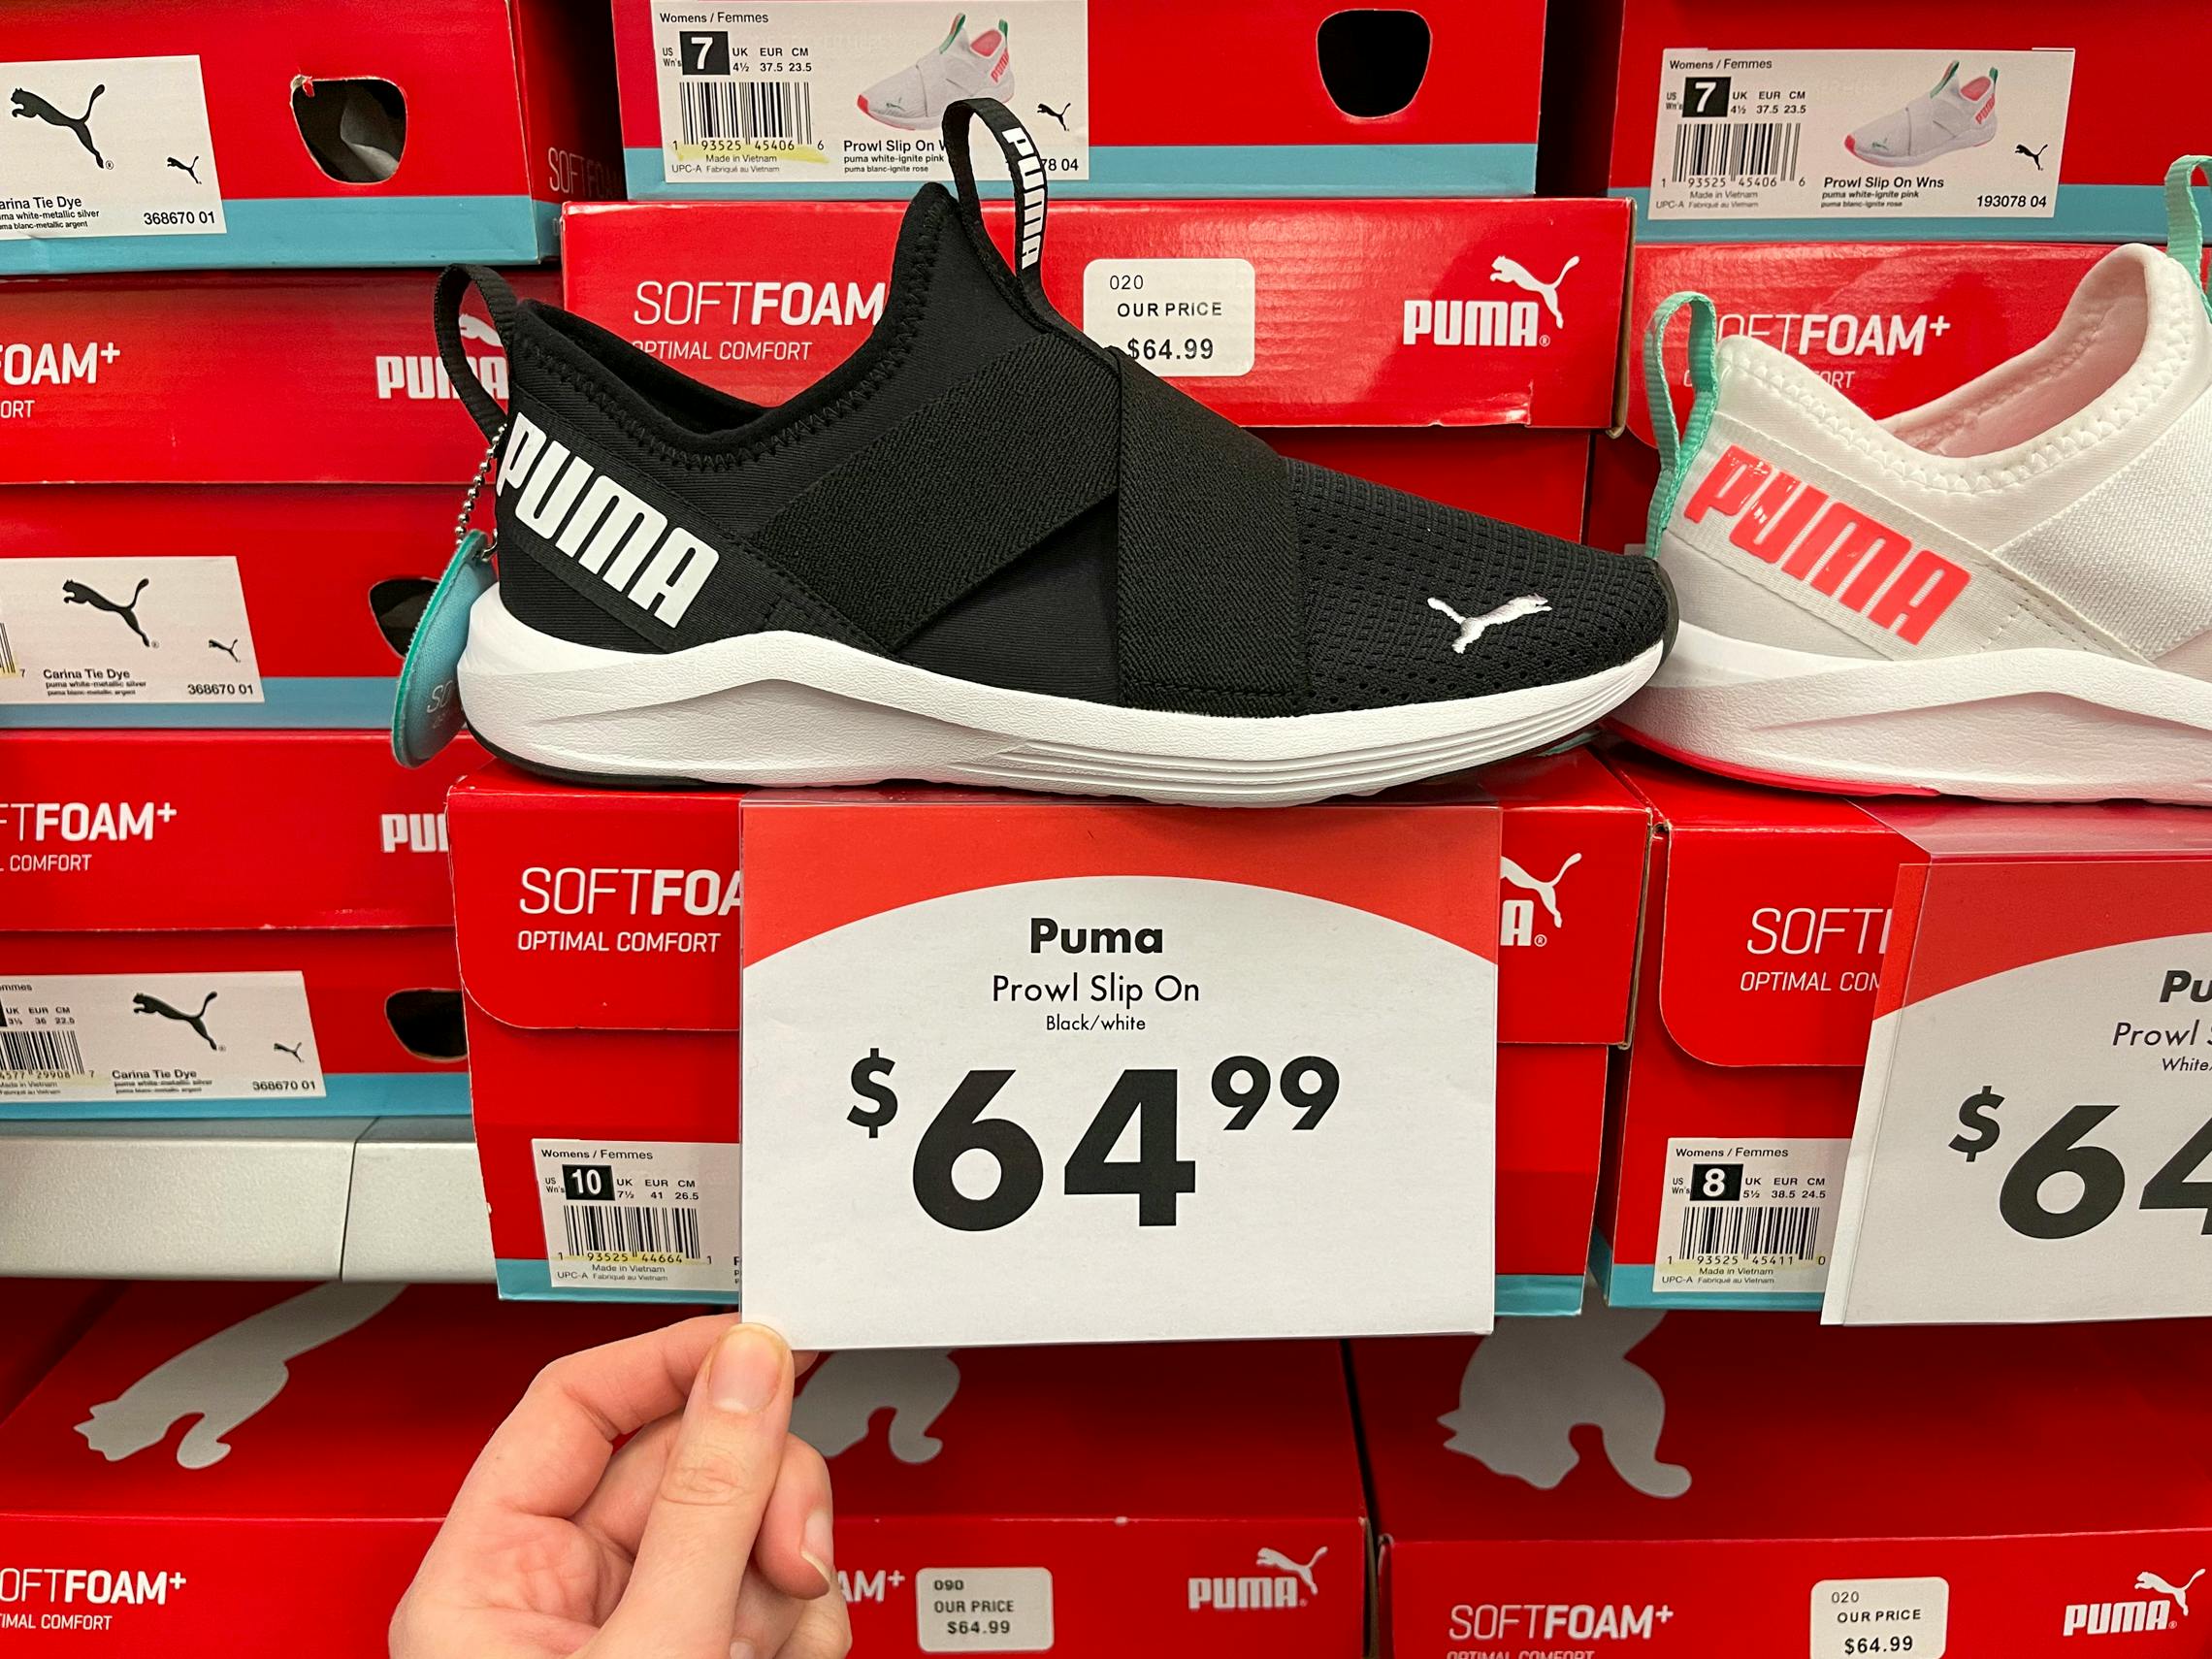 A pair of Puma running shoes on a shelf with shoe boxes and a price tag reading, "$64.99".